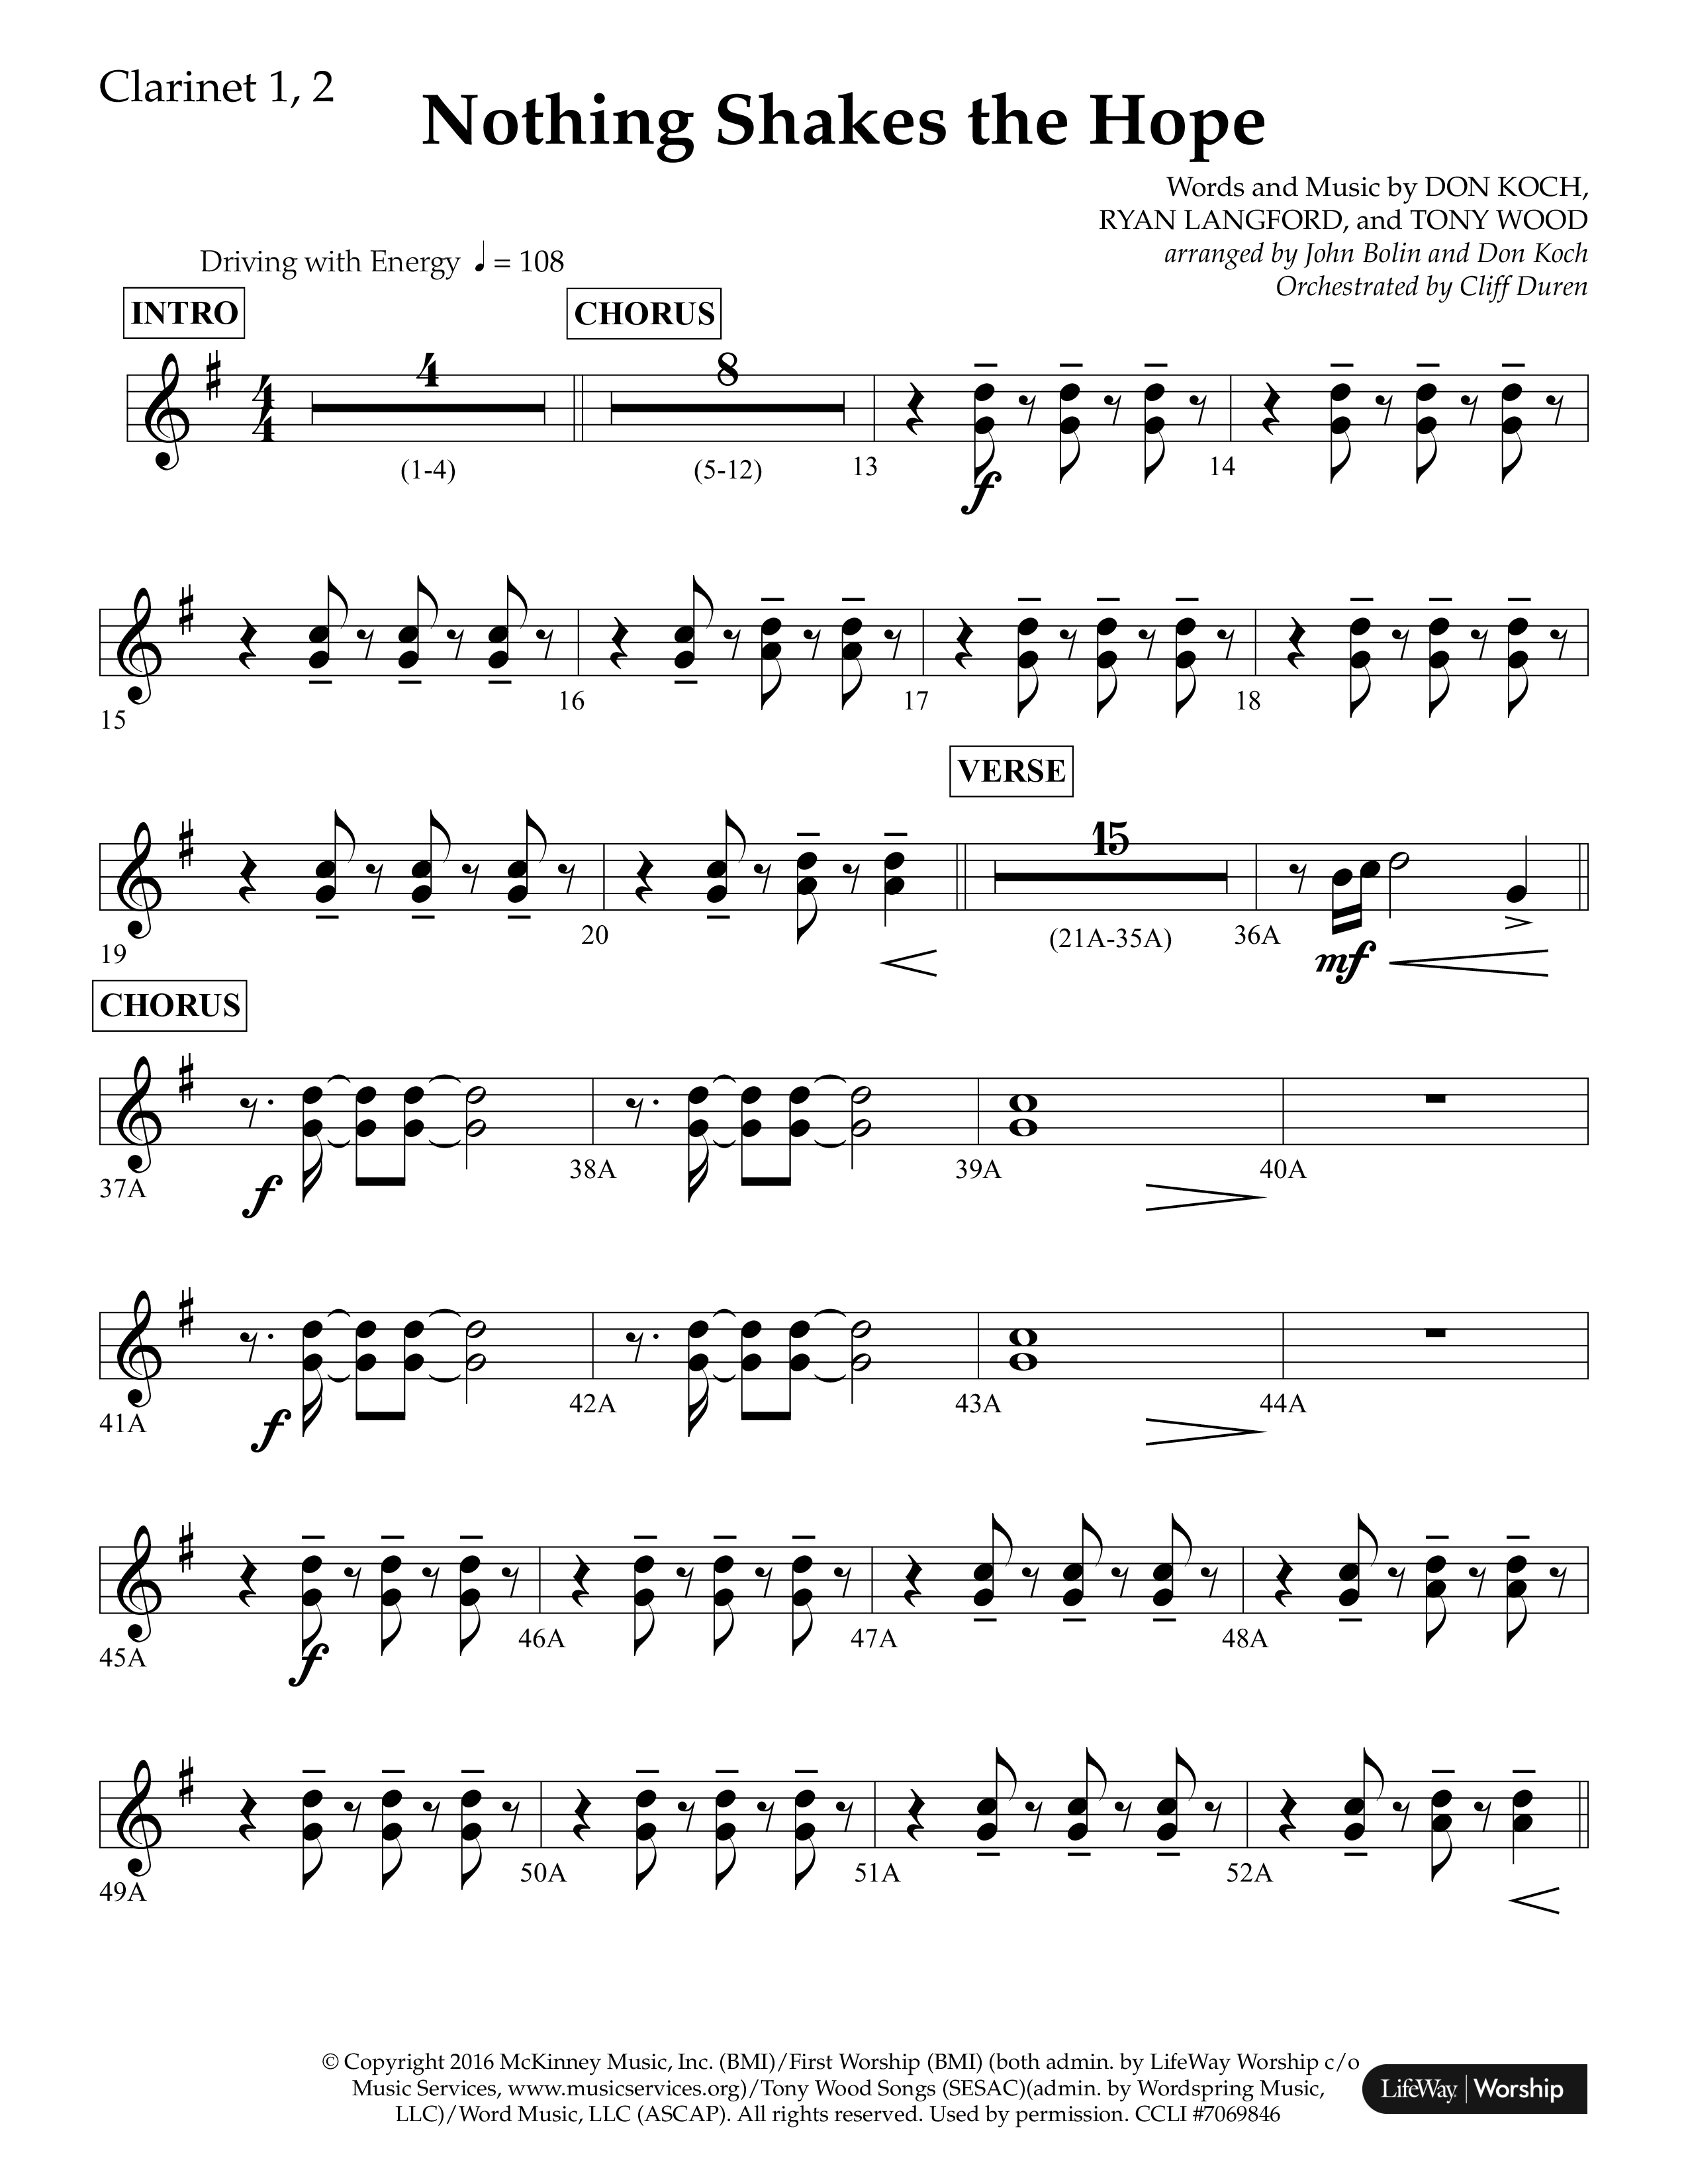 Nothing Shakes The Hope (Choral Anthem SATB) Clarinet 1/2 (Lifeway Choral / Arr. John Bolin / Arr. Don Koch / Orch. Cliff Duren)